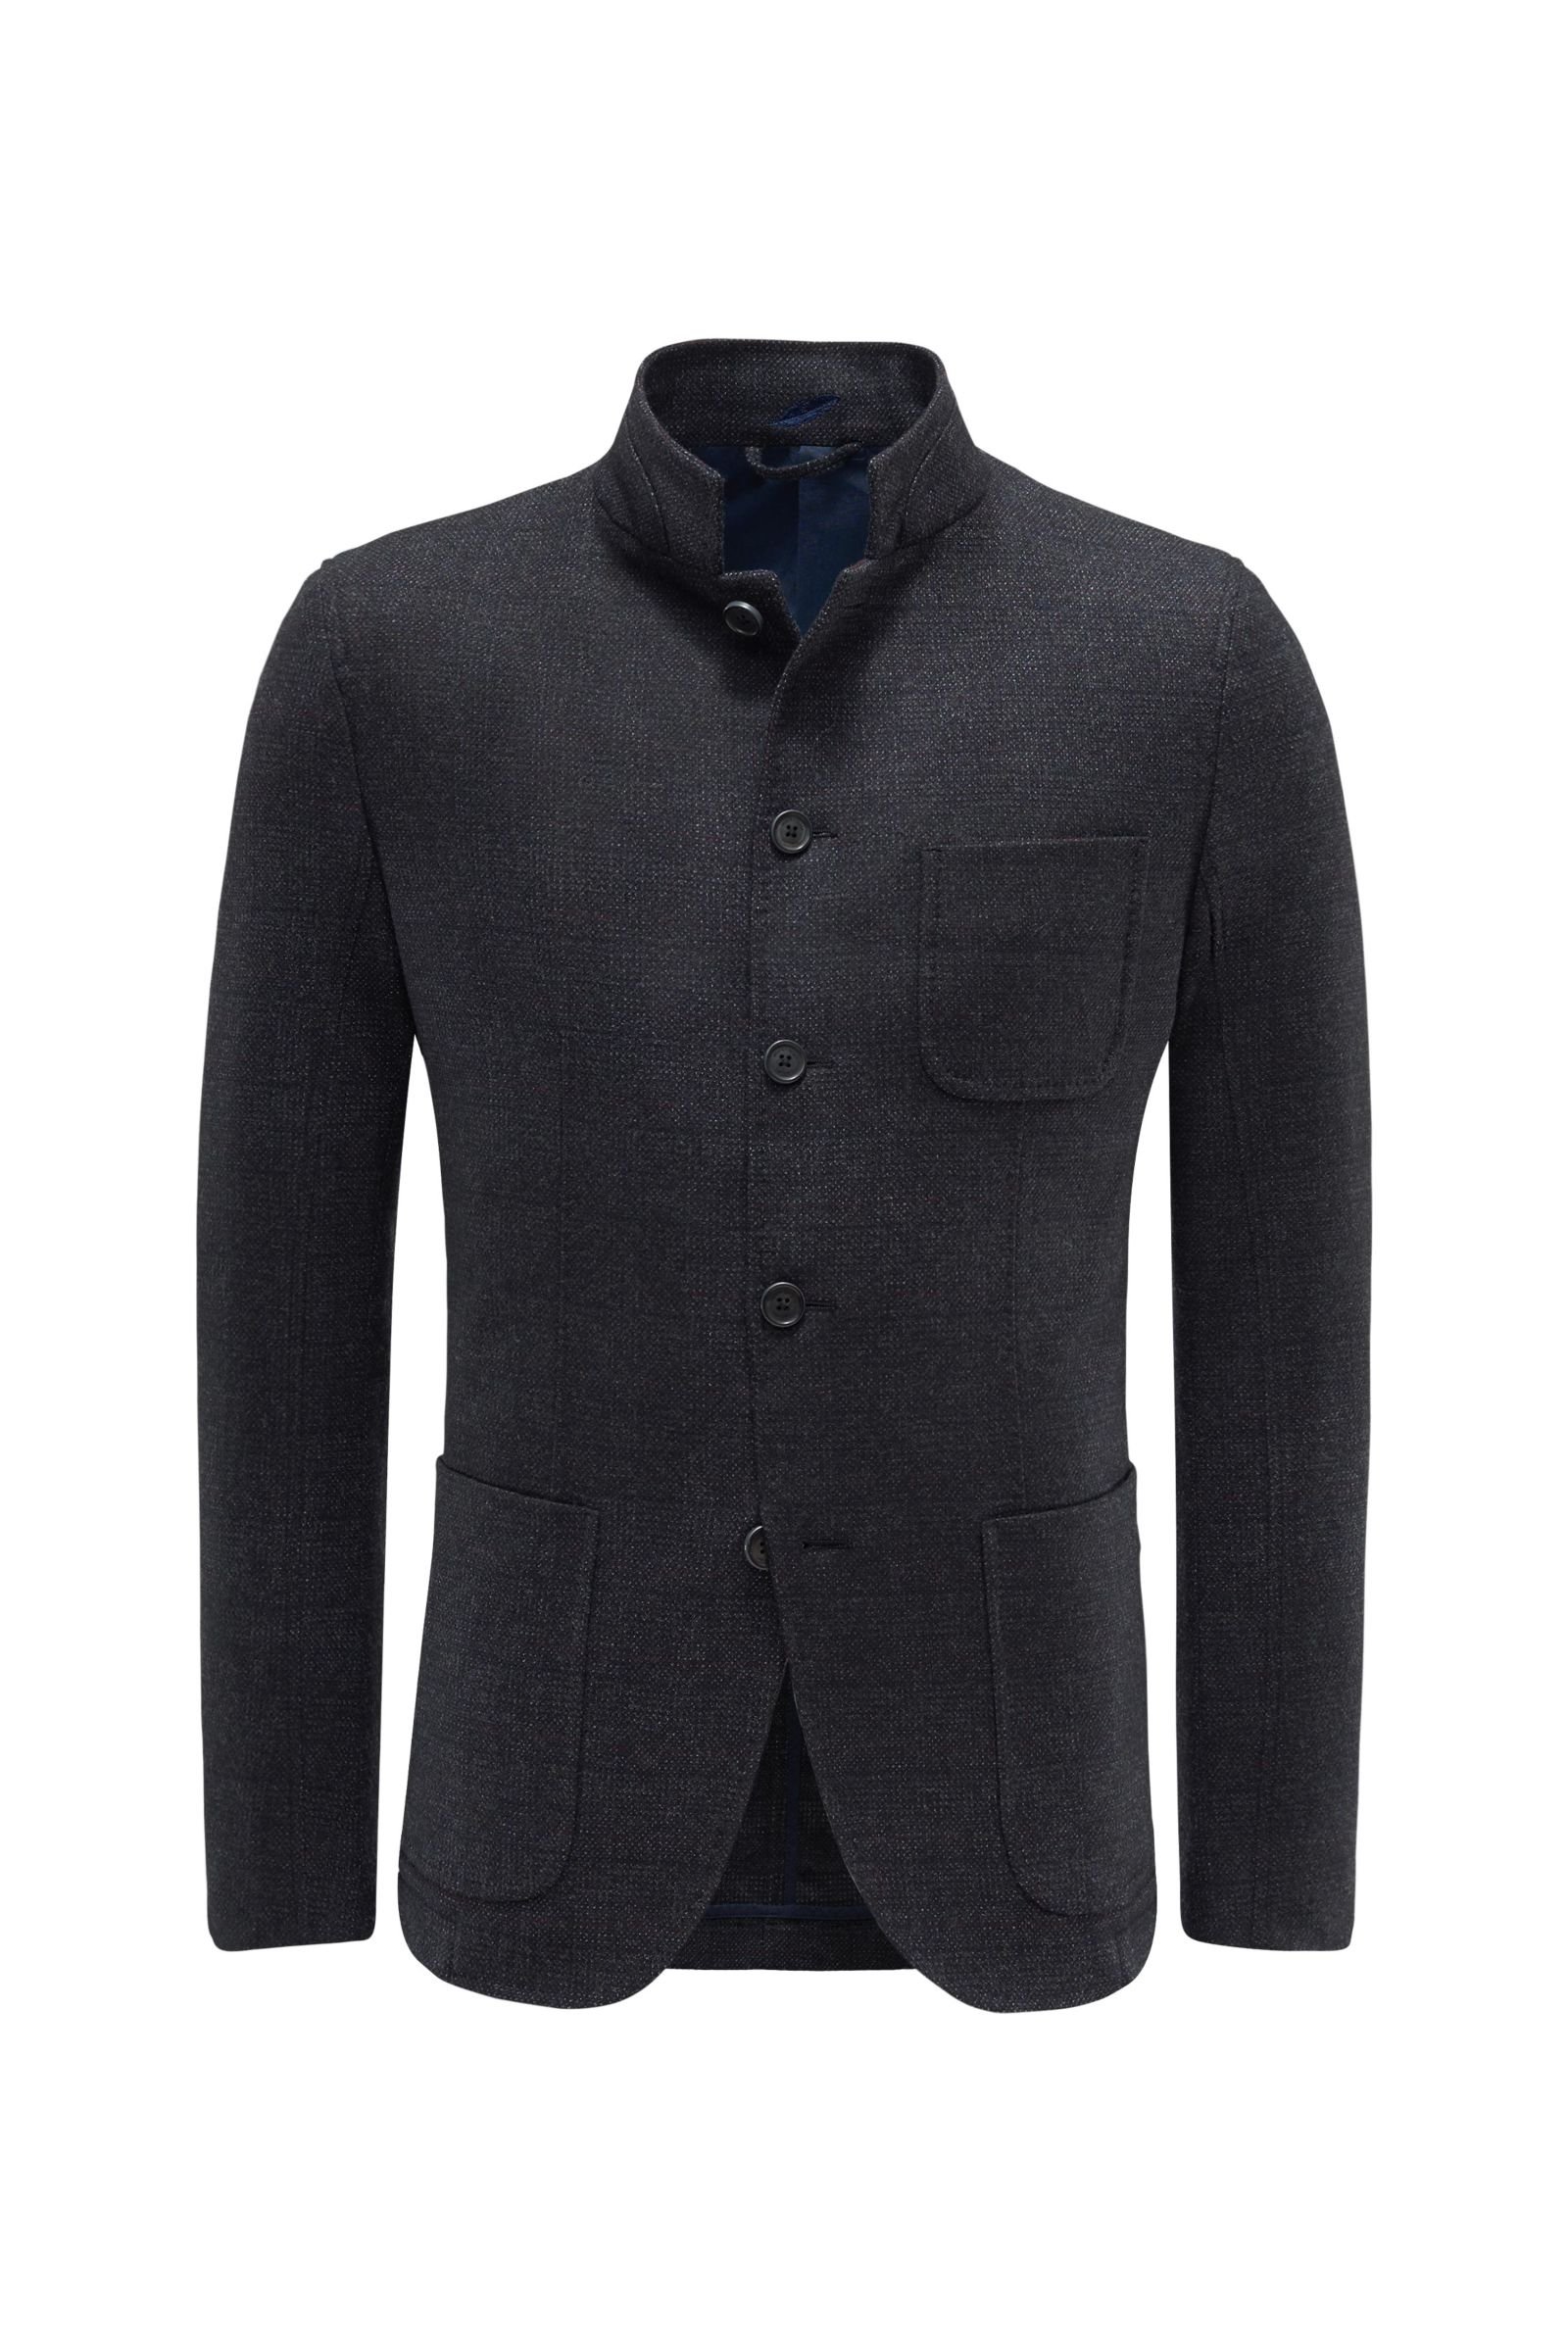 Smart-casual jacket anthracite checked